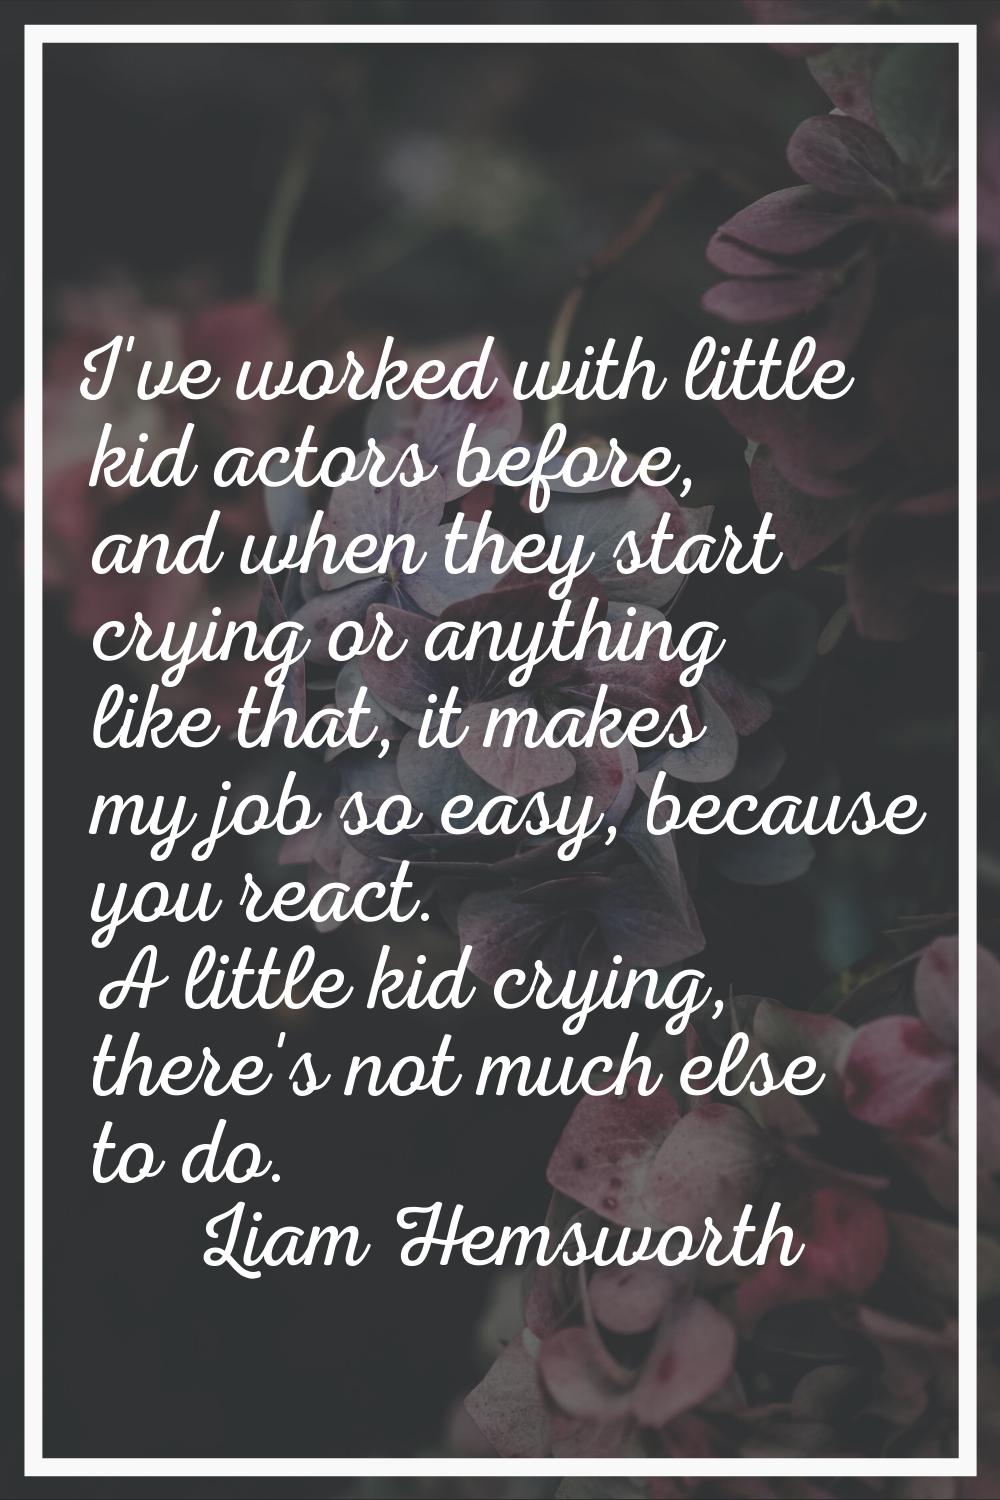 I've worked with little kid actors before, and when they start crying or anything like that, it mak